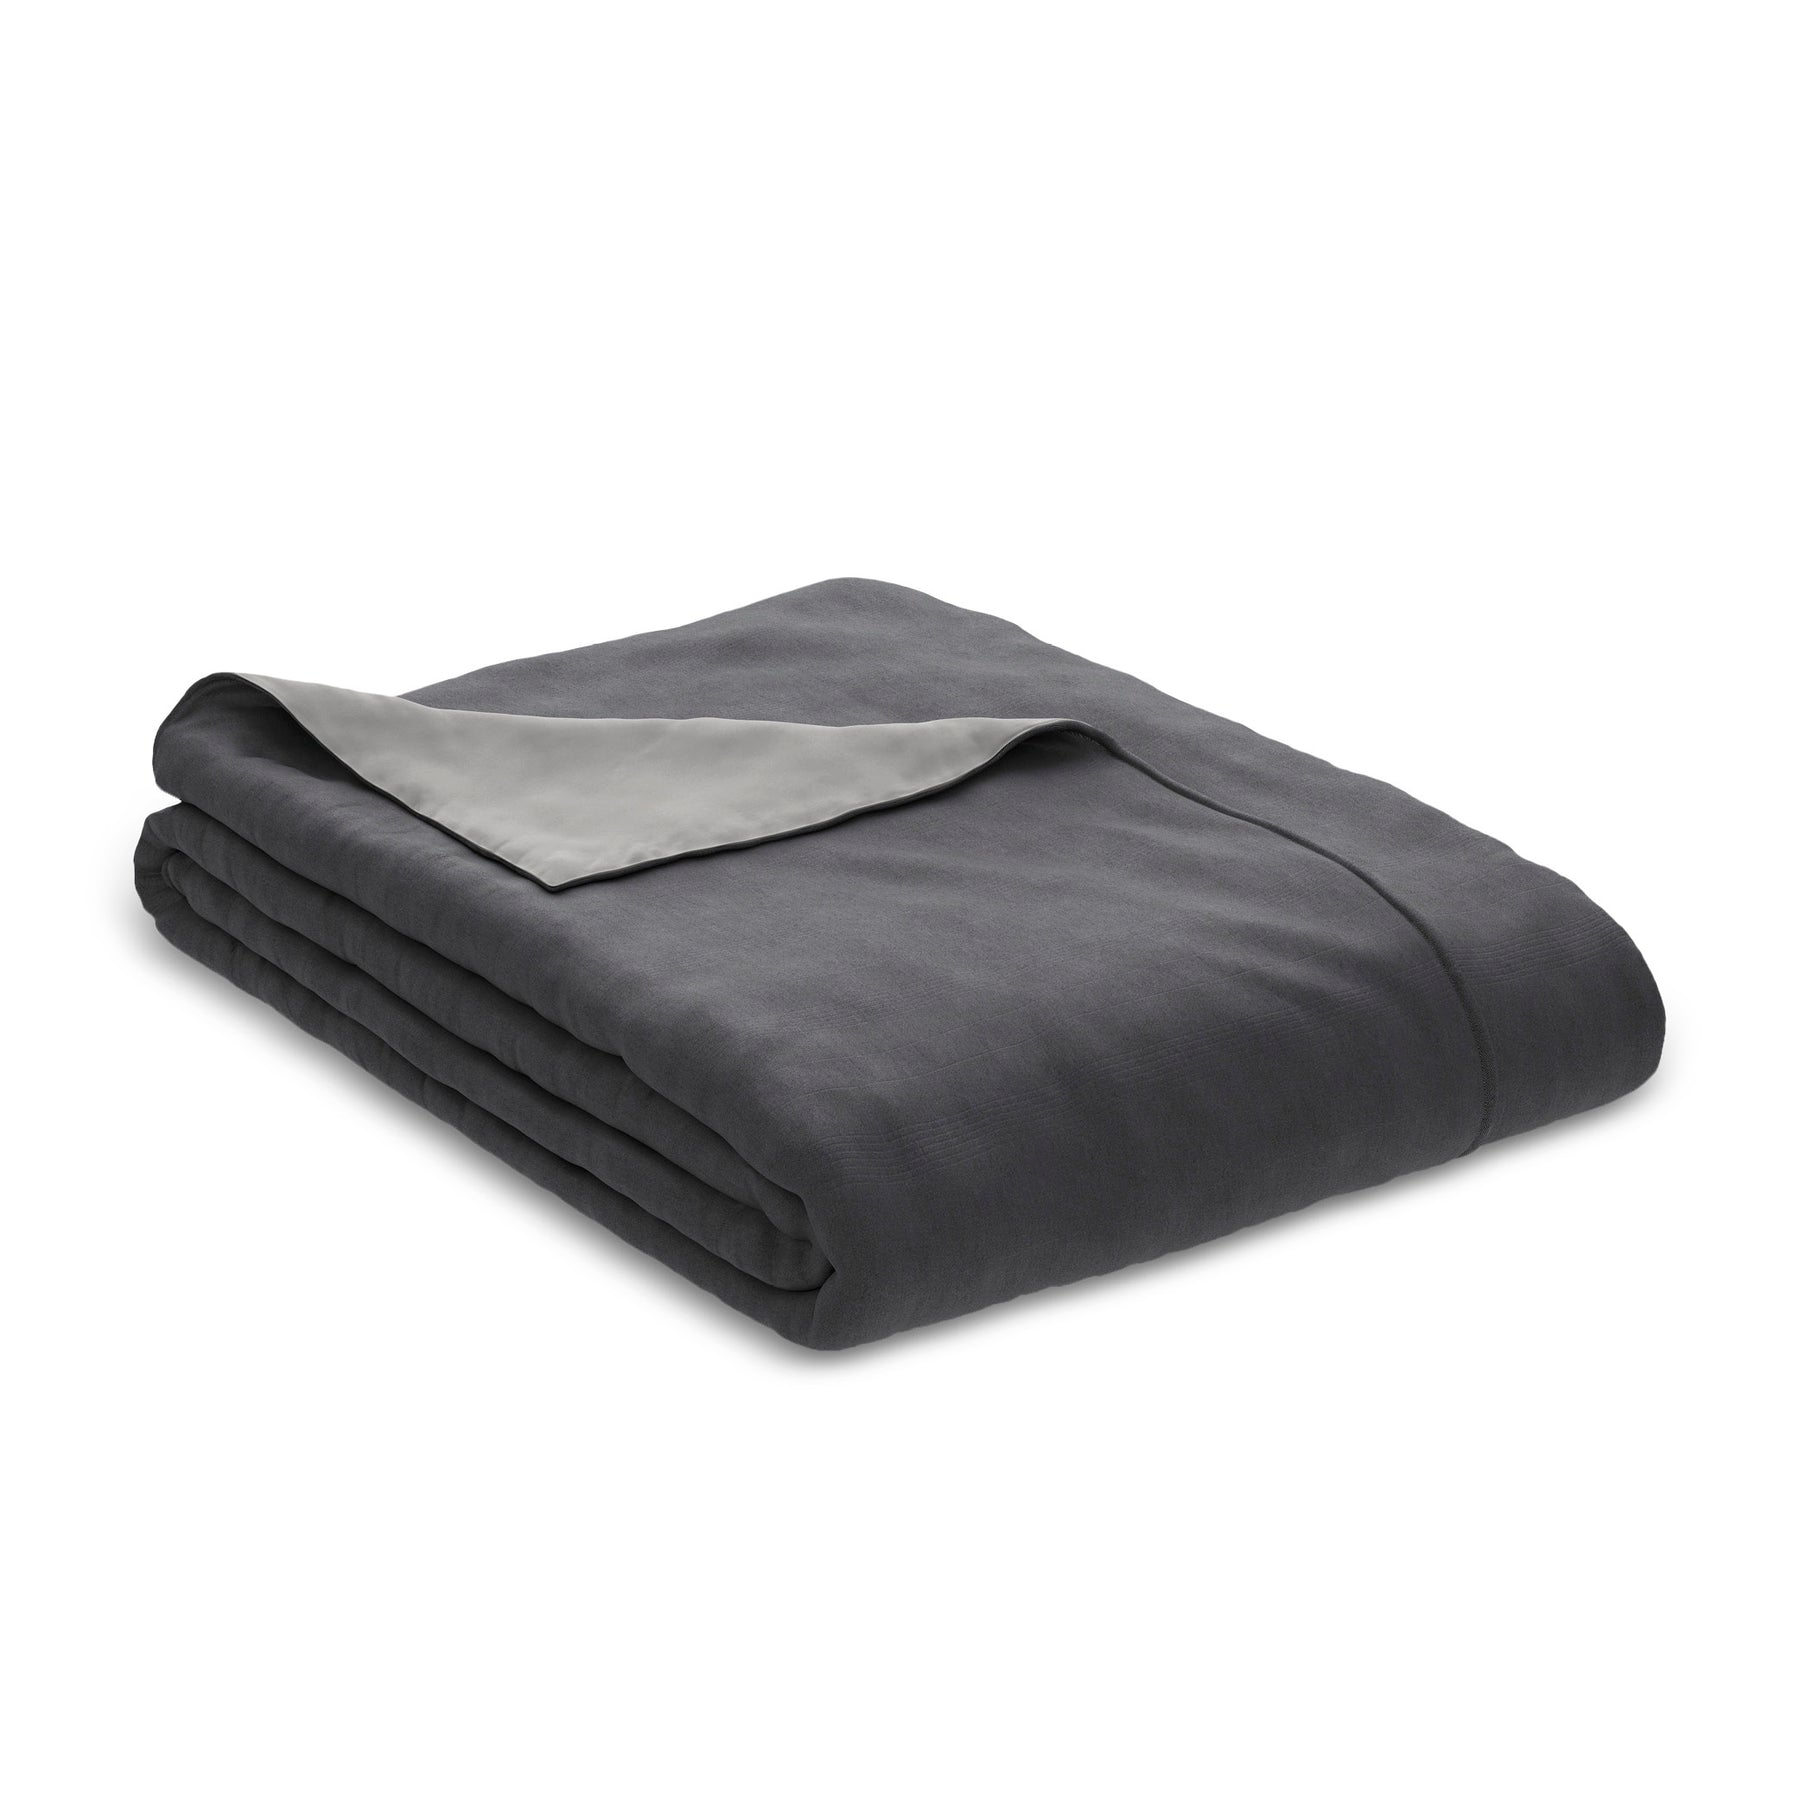 Image of a neatly folded Dove Gray/Shadow Soft Touch Duvet Cover with the Shadow side up and the back left corner folded over to show the Dove Gray color on a white background